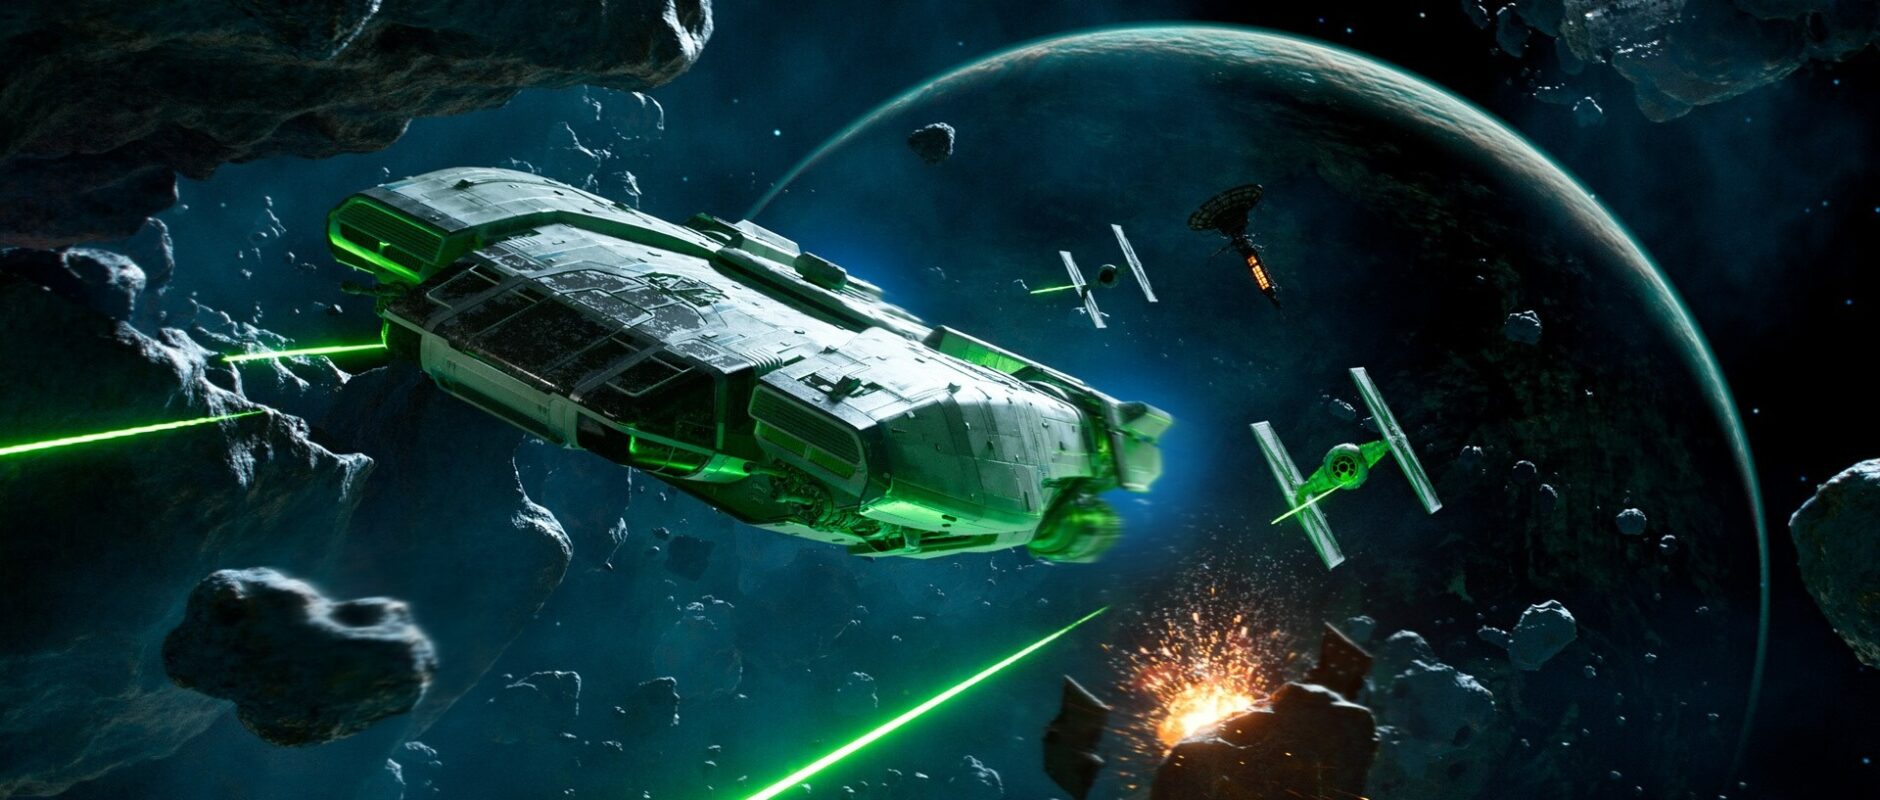 Star Wars: Outlaws Will Feature Space Fights With Much Larger